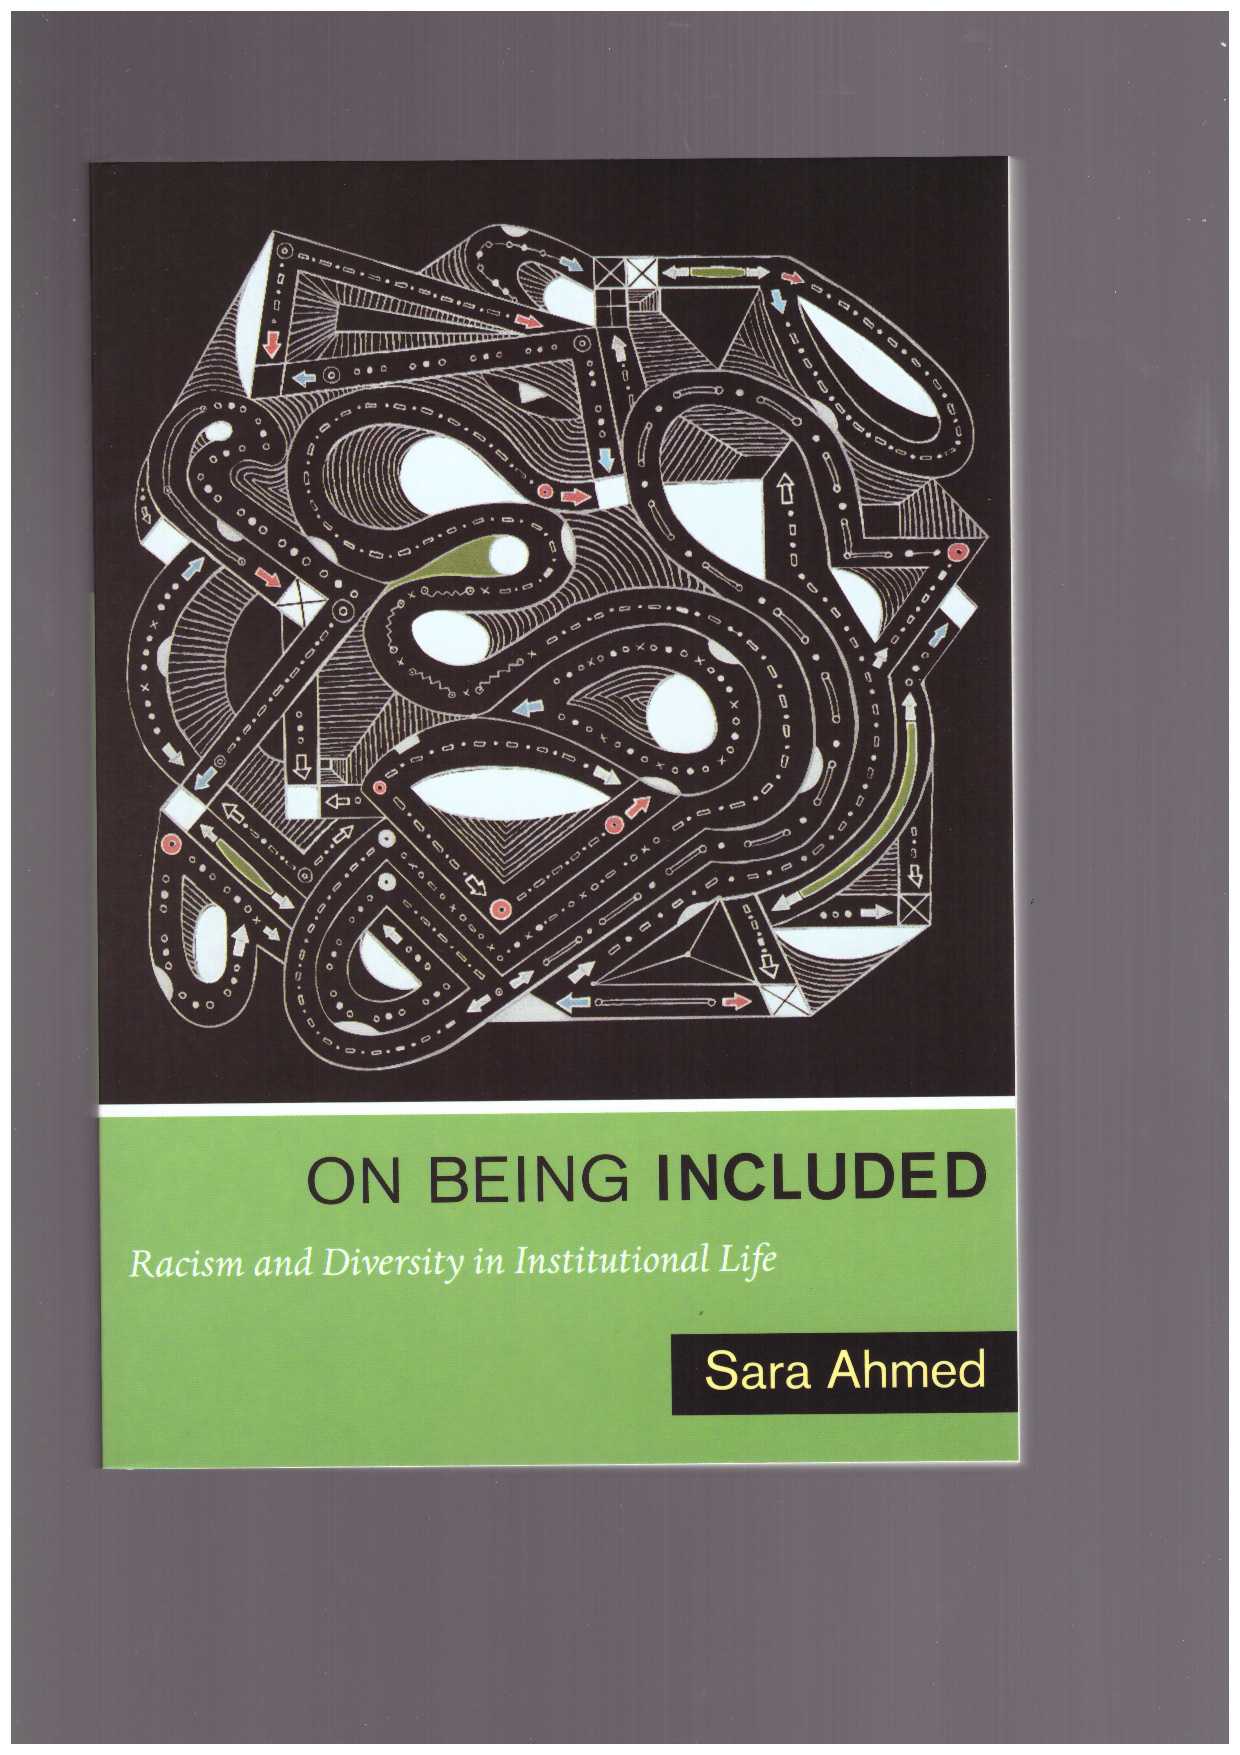 AHMED, Sara - On being included